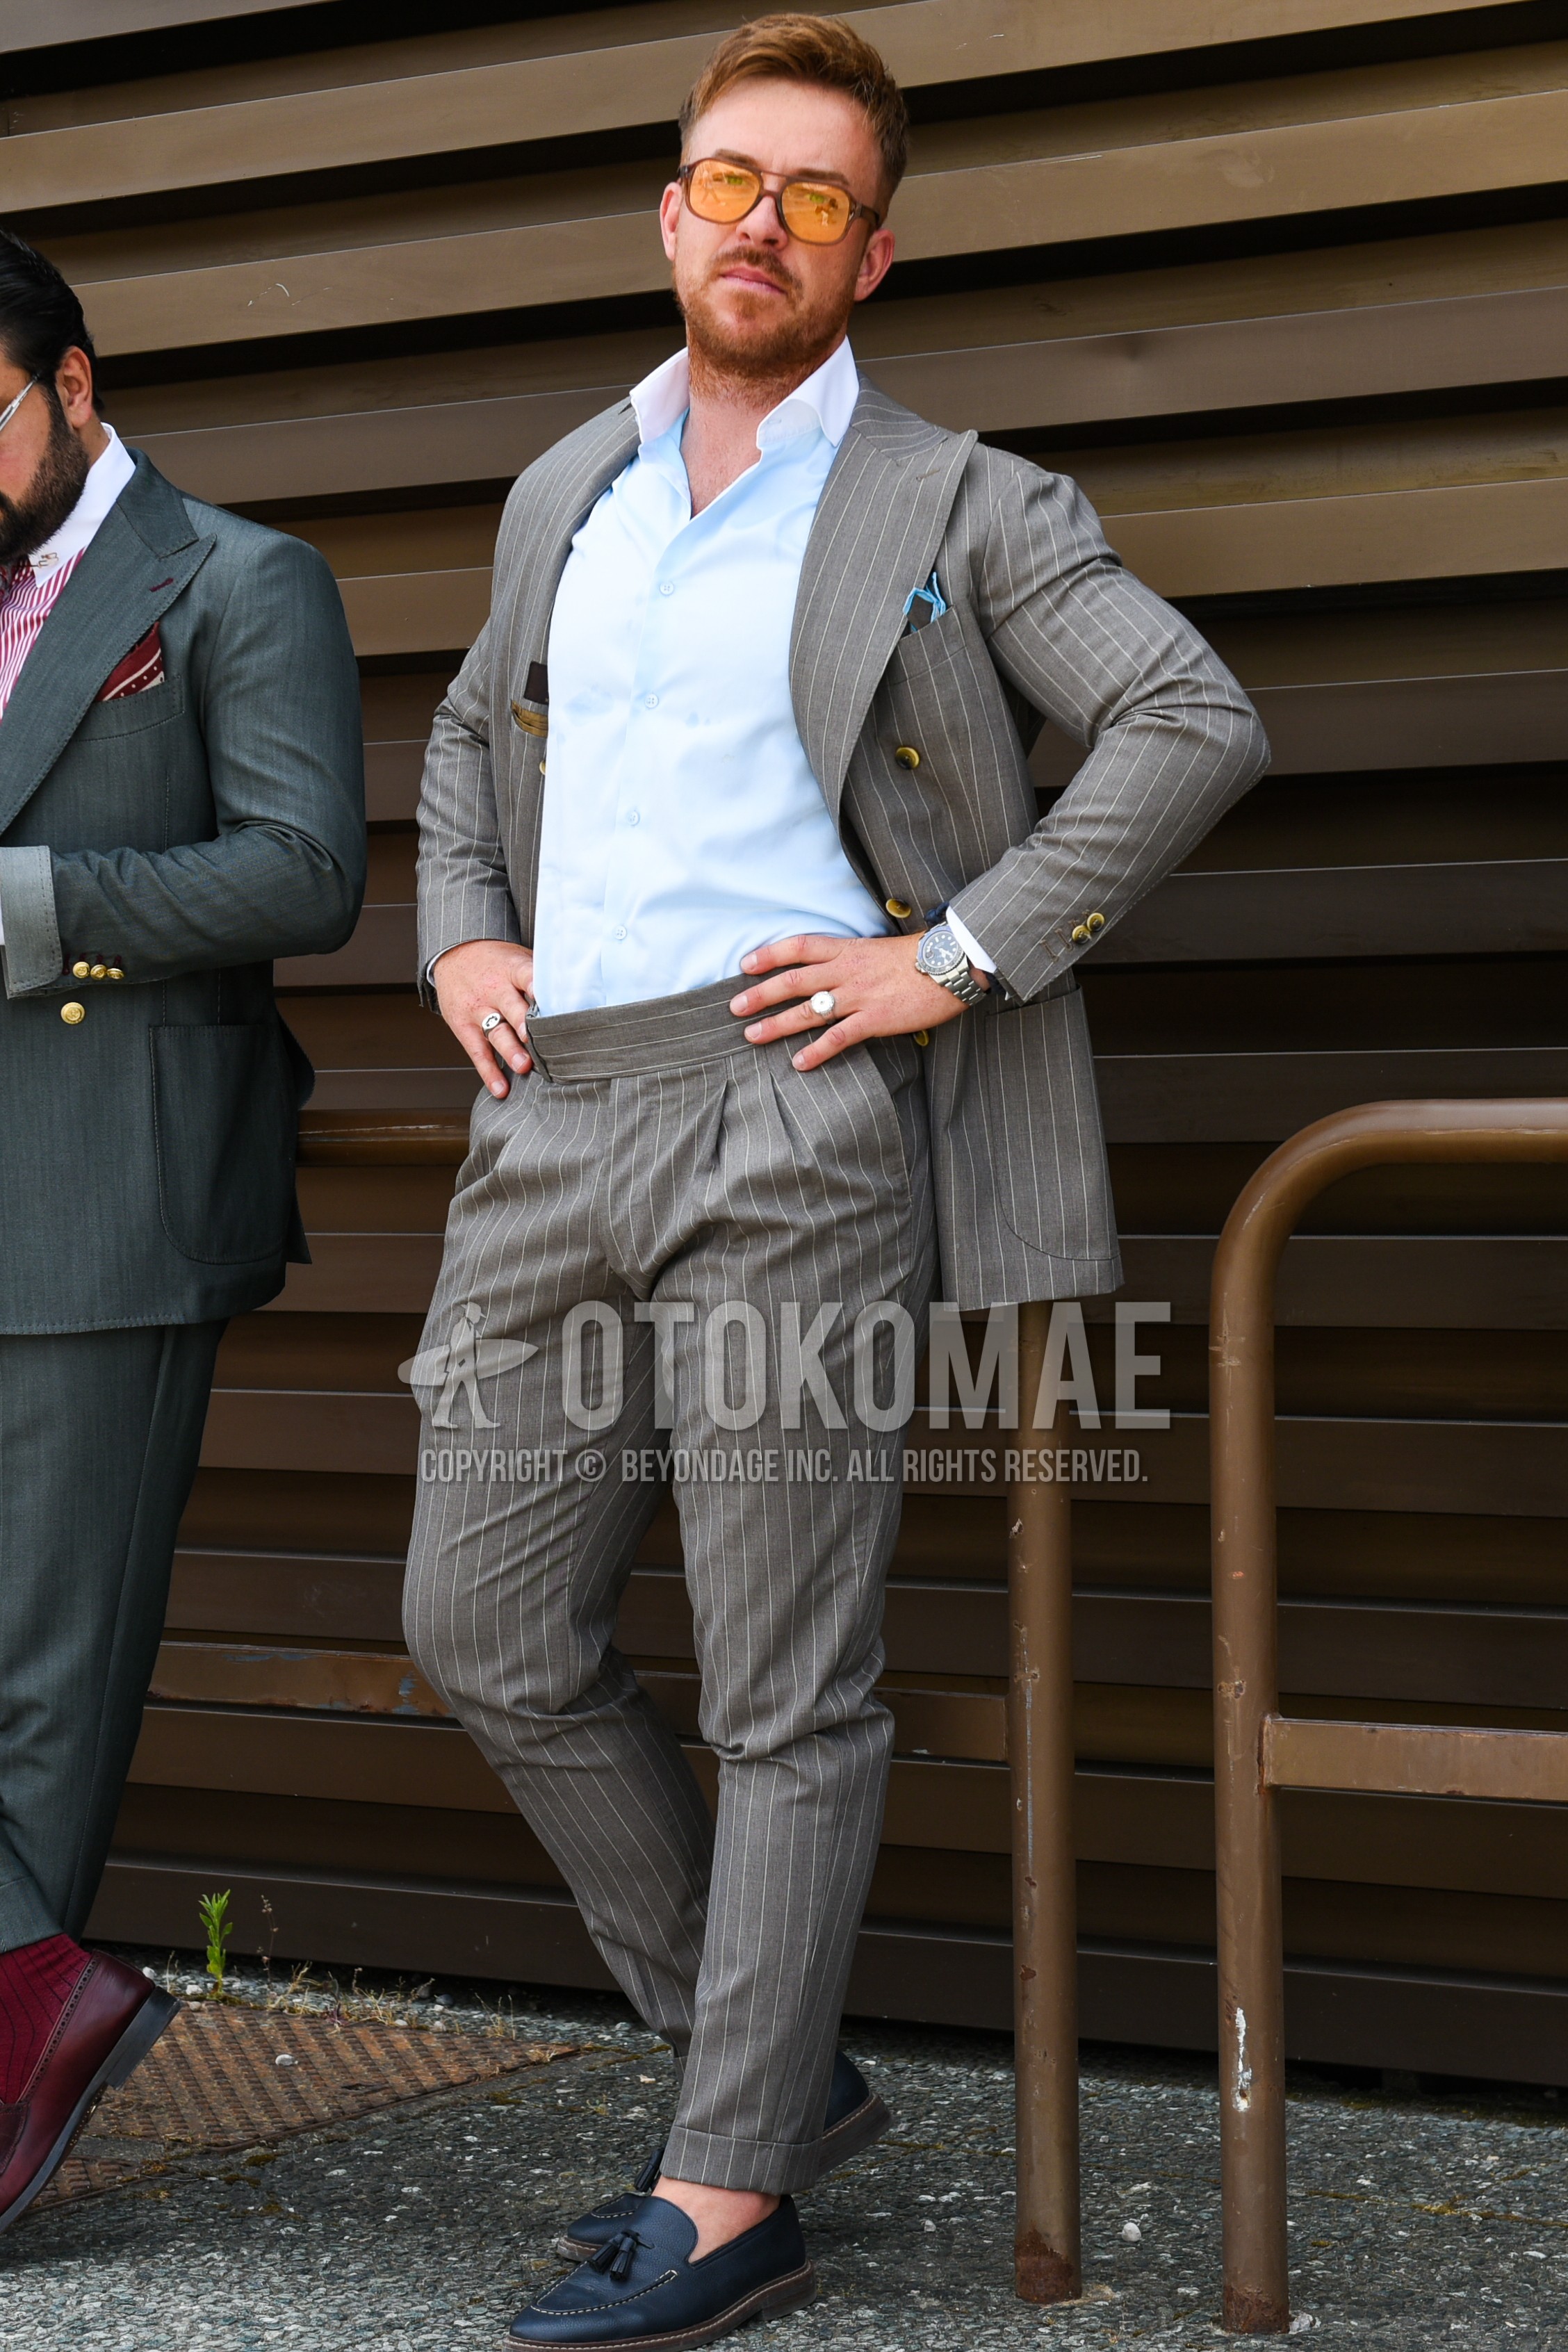 Men's spring summer autumn outfit with yellow plain sunglasses, gray stripes tailored jacket, light blue plain shirt, gray stripes slacks, gray stripes beltless pants, navy tassel loafers leather shoes, gray stripes suit.